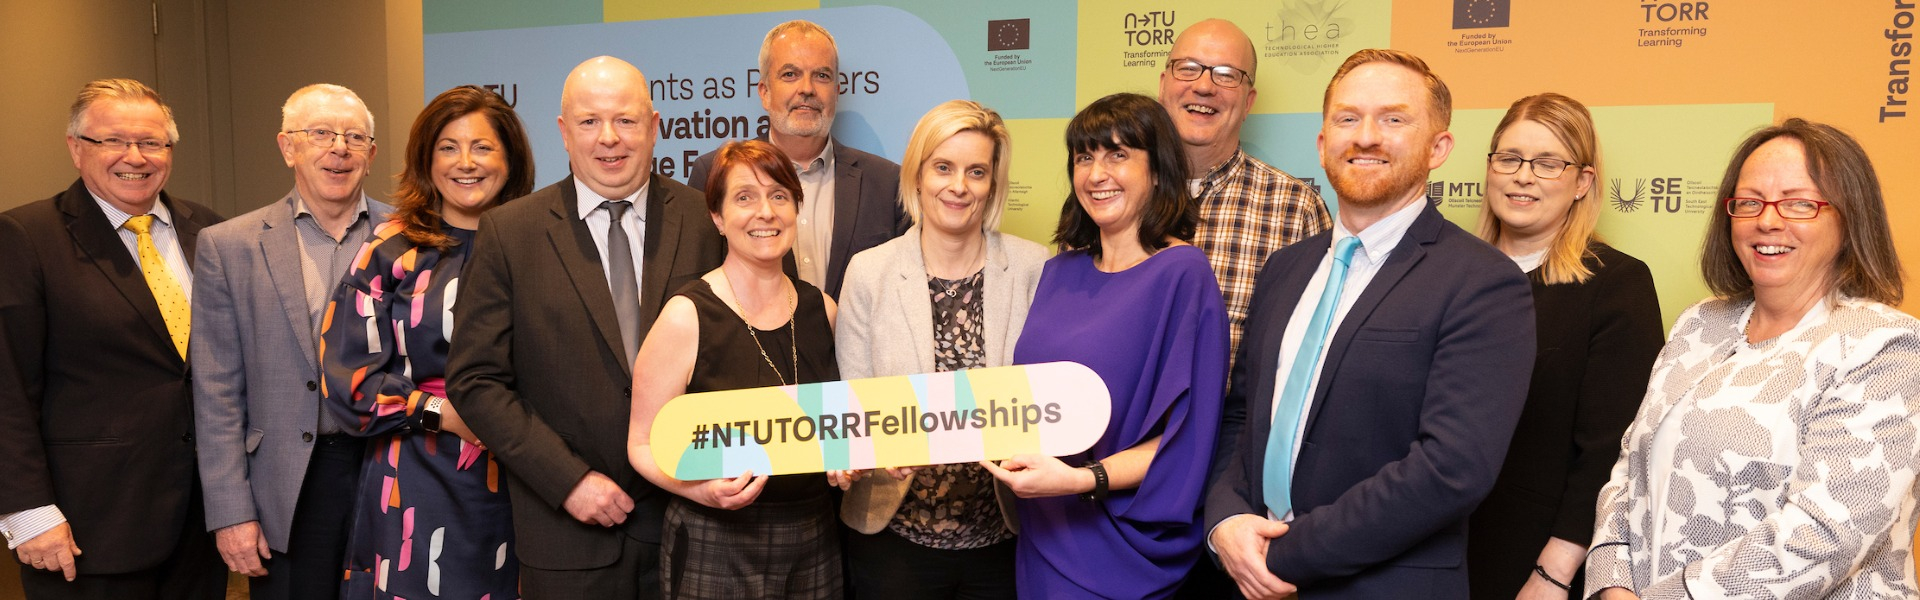 Photo of smiling people holding banner at the N-TUTORR launch event in Dublin